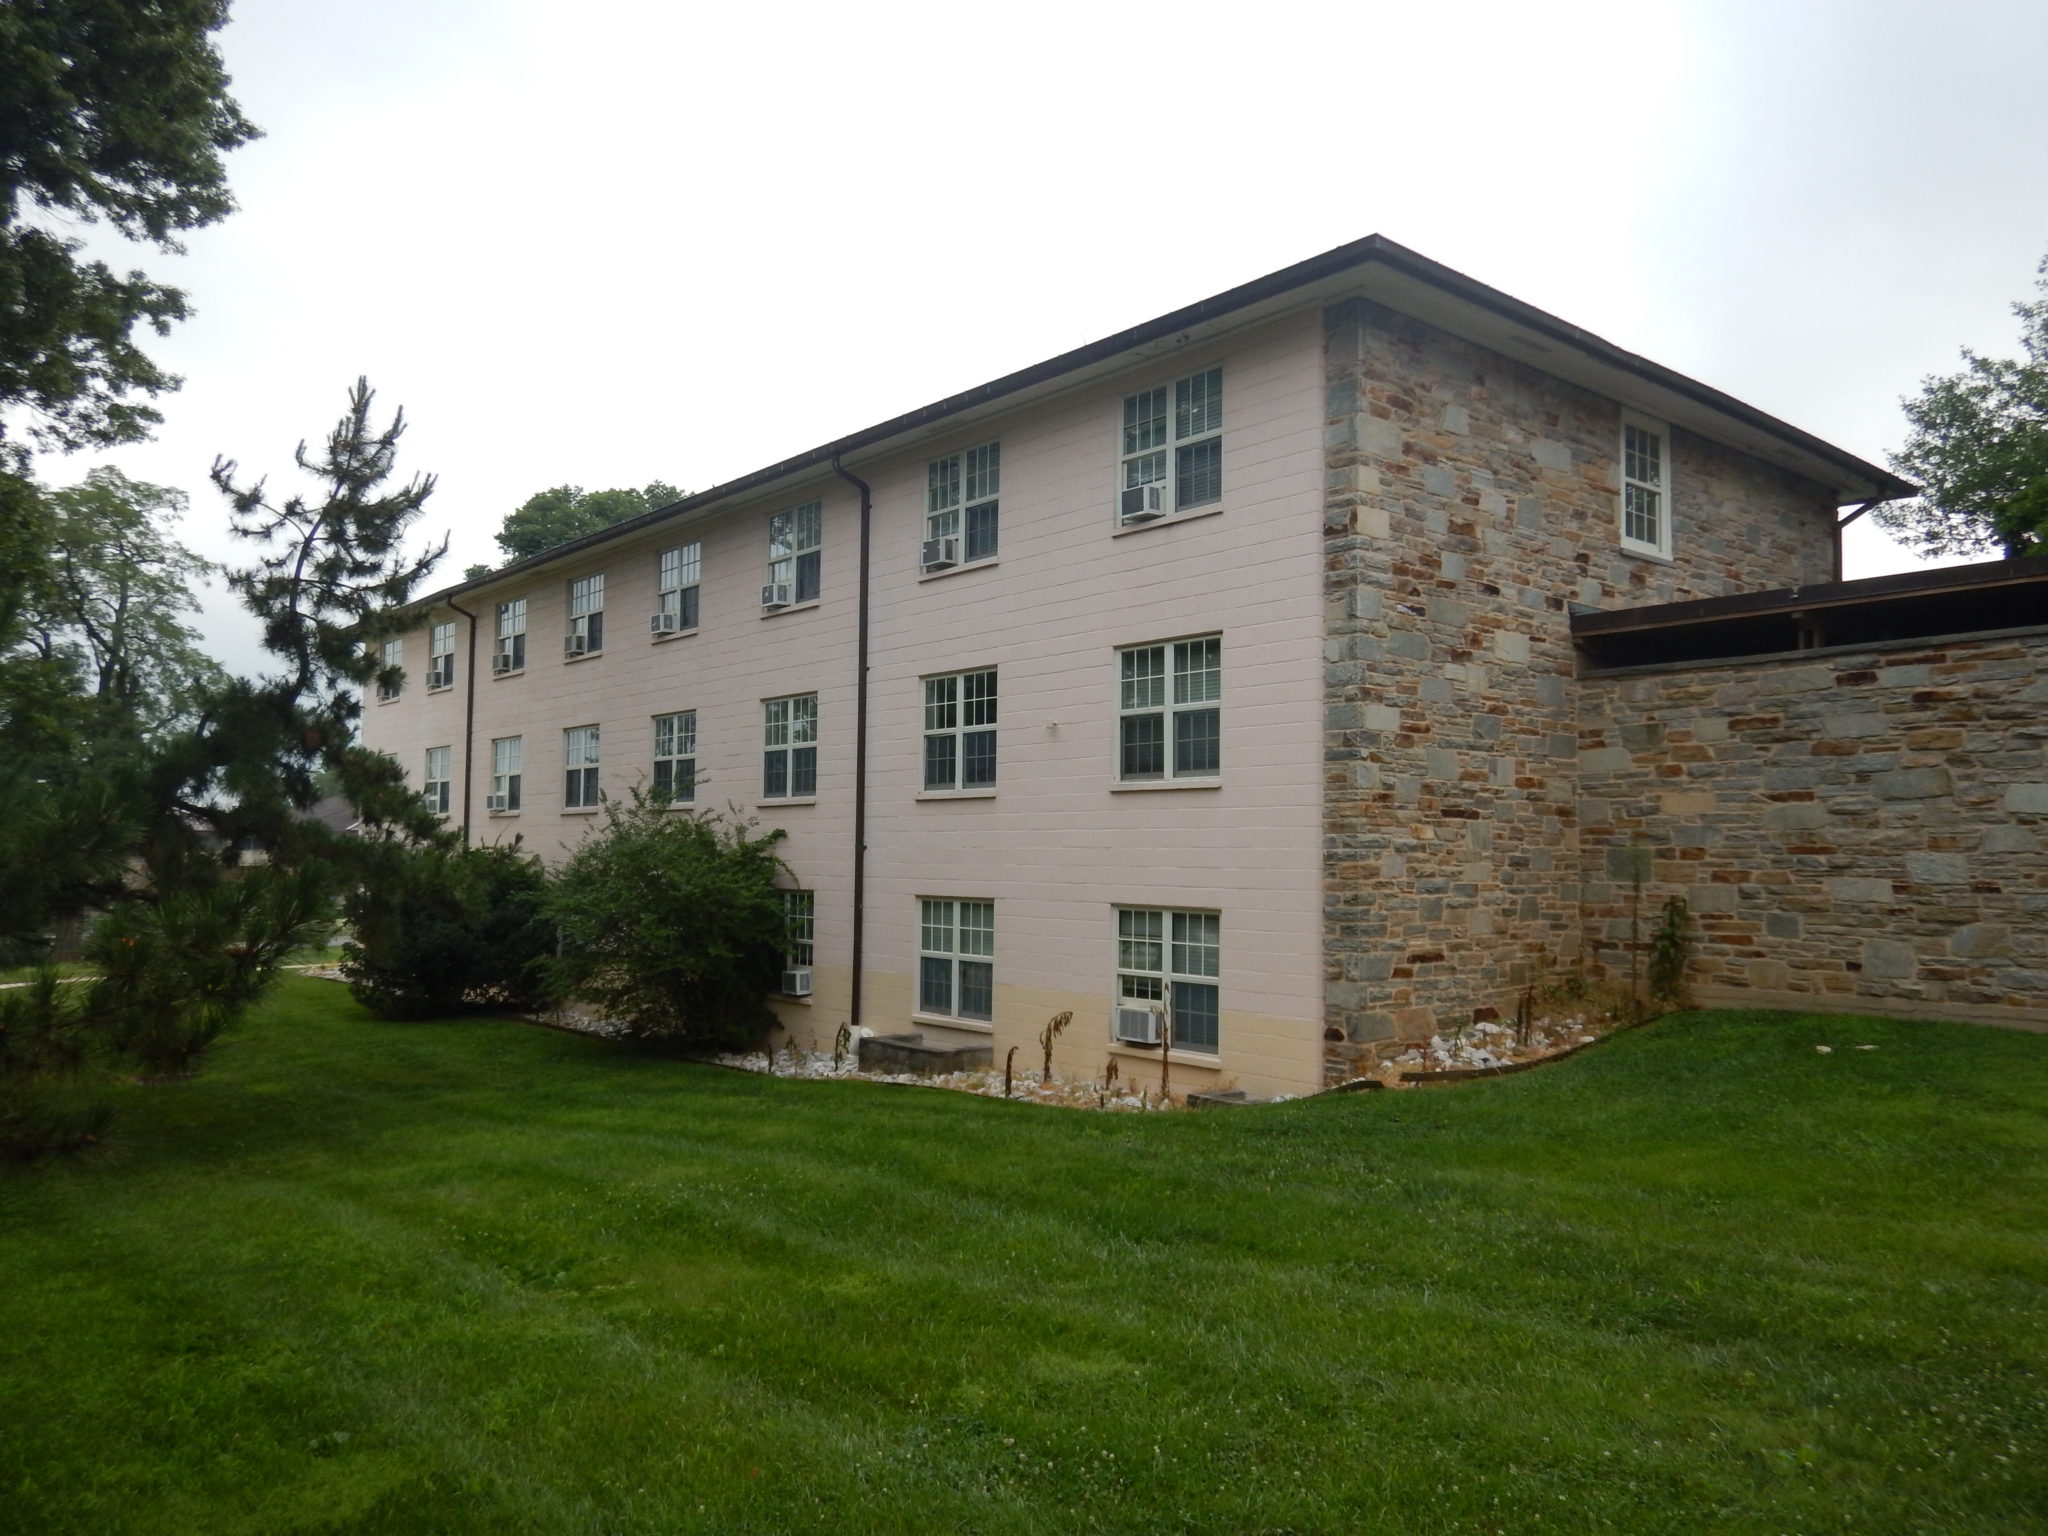 Goucher College Dorm, a cinder block and rough stone building.